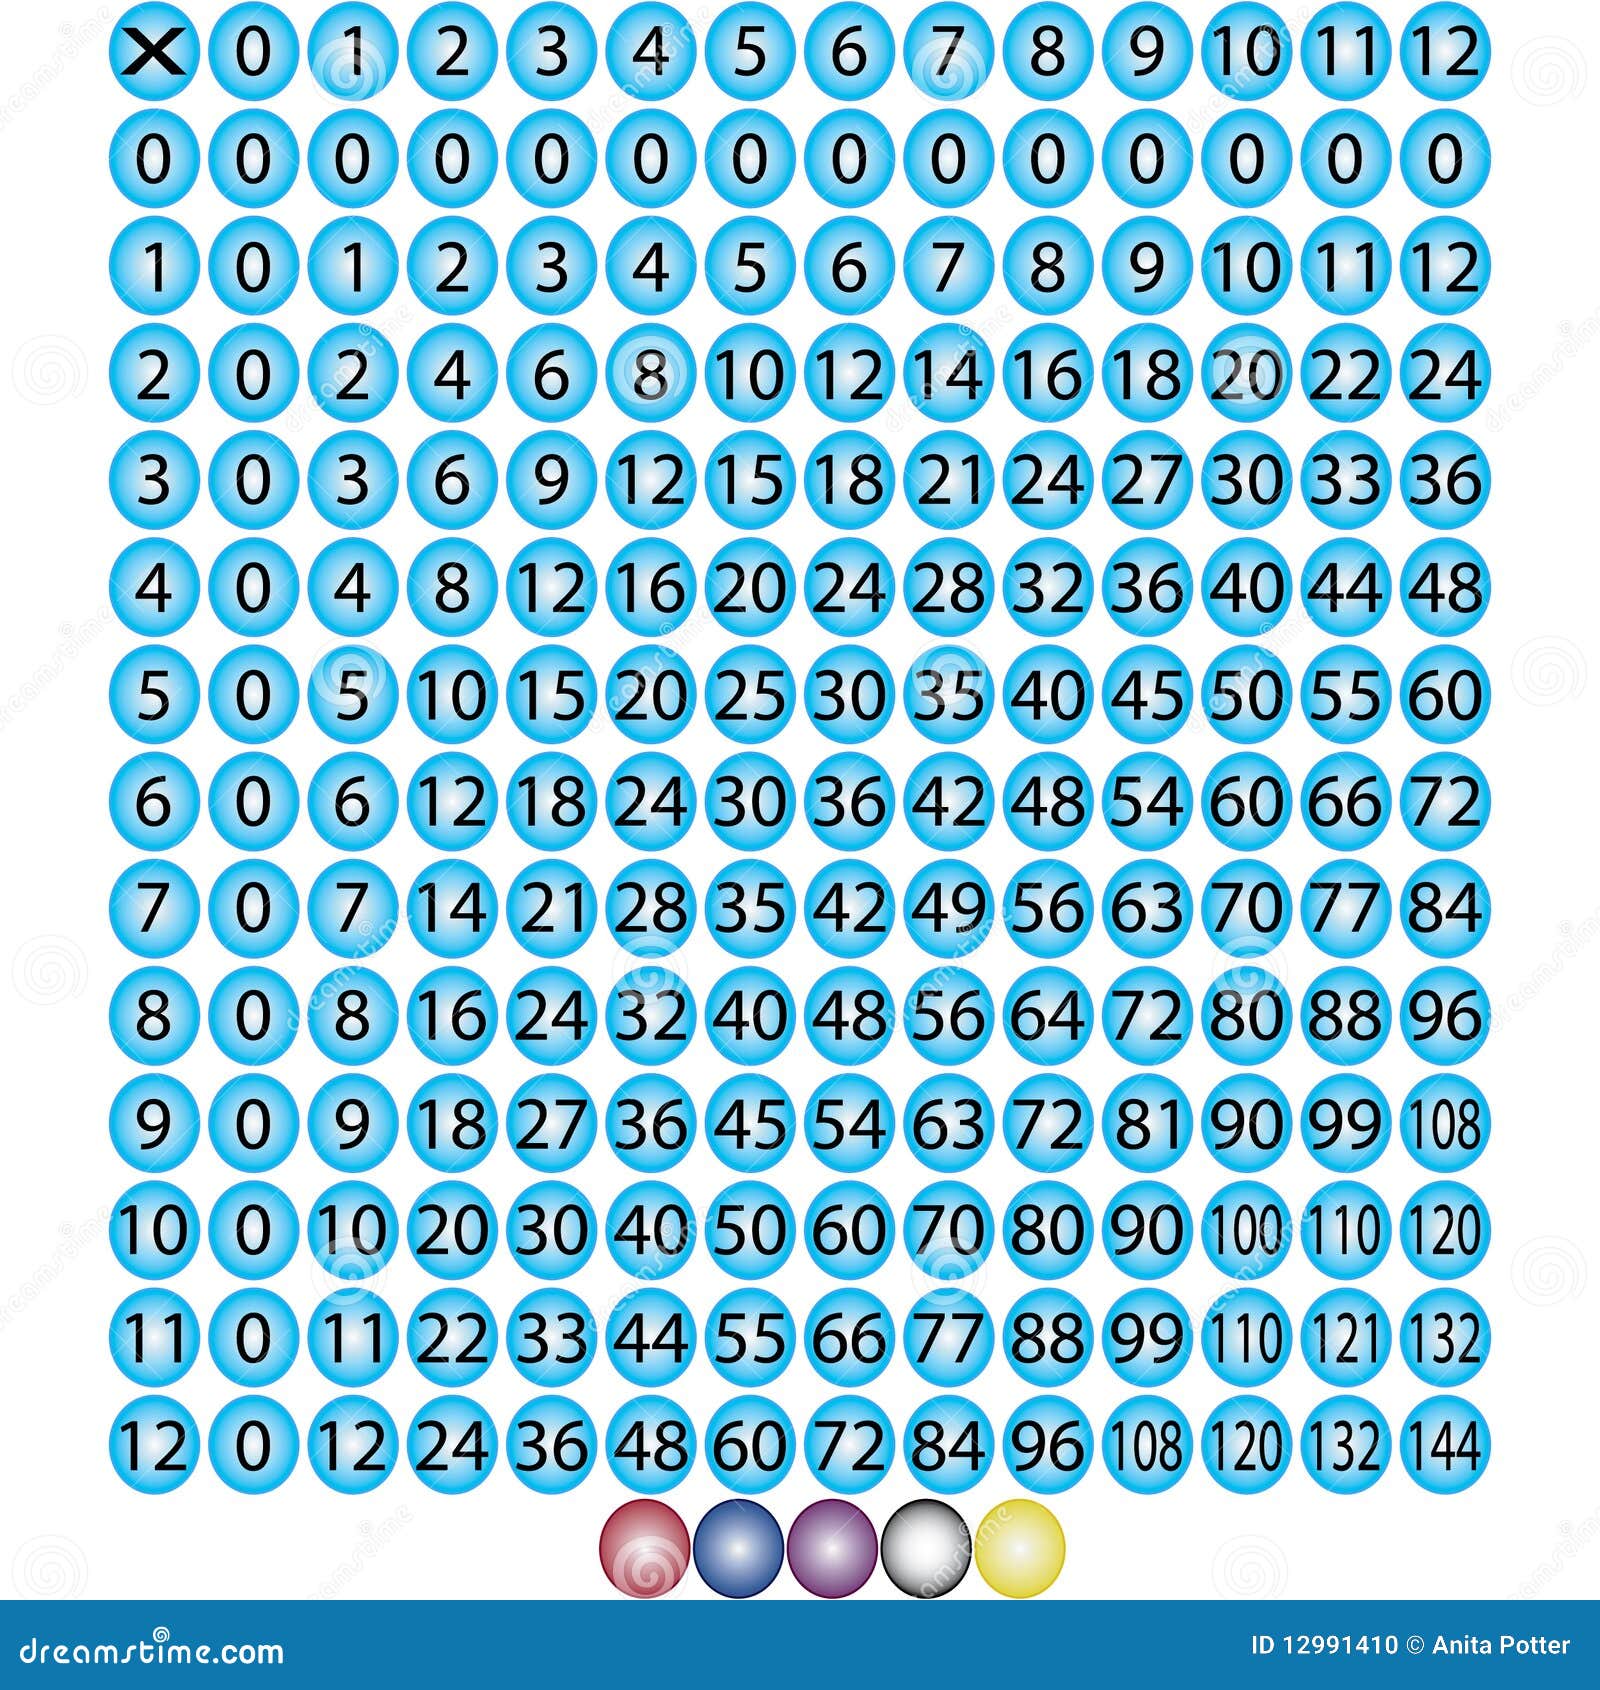 Multiplication Chart Up To 2000